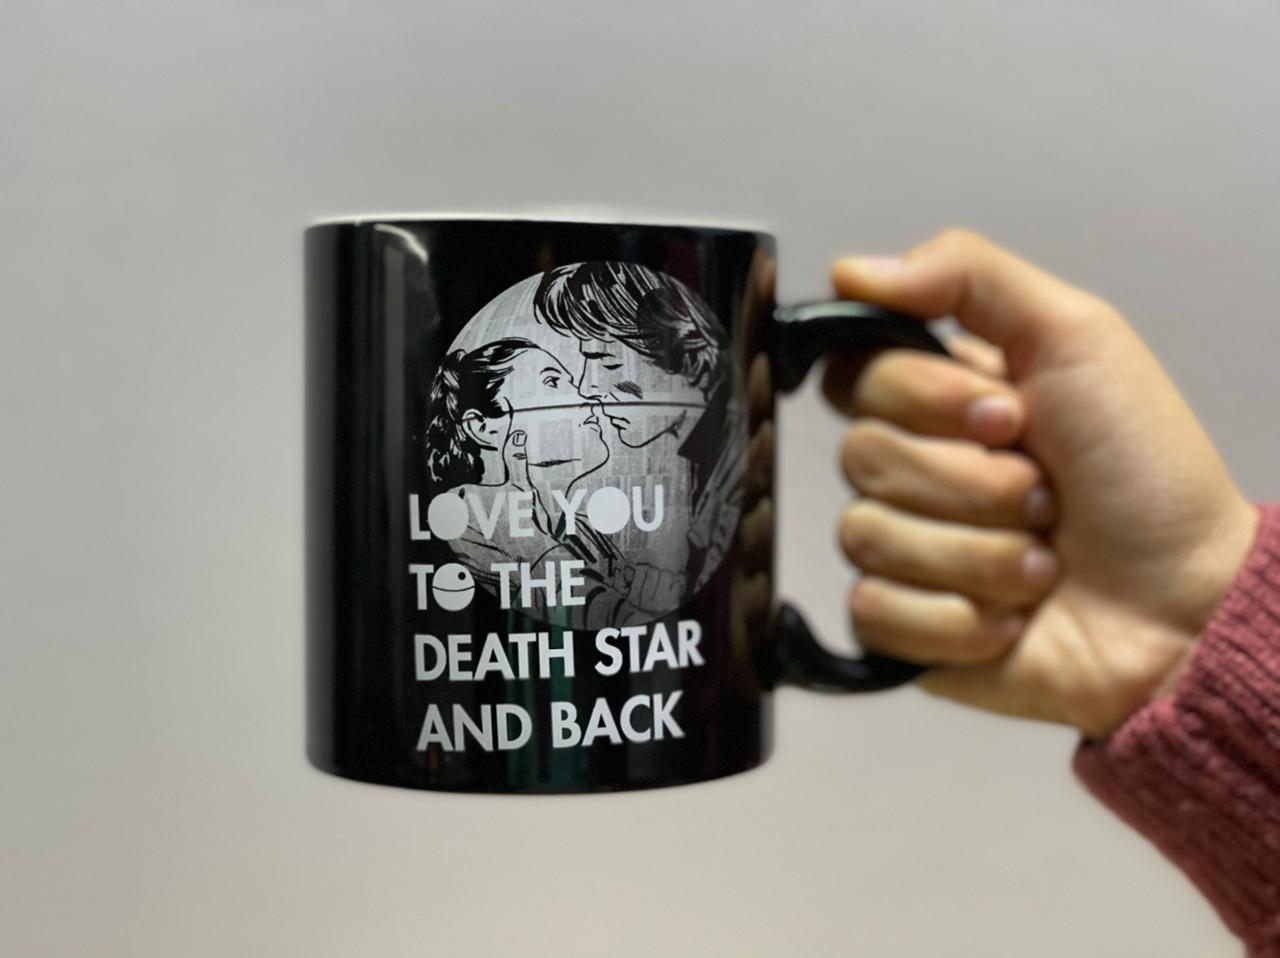 Taza Jumbo de Star Wars: Love you to the death star and back